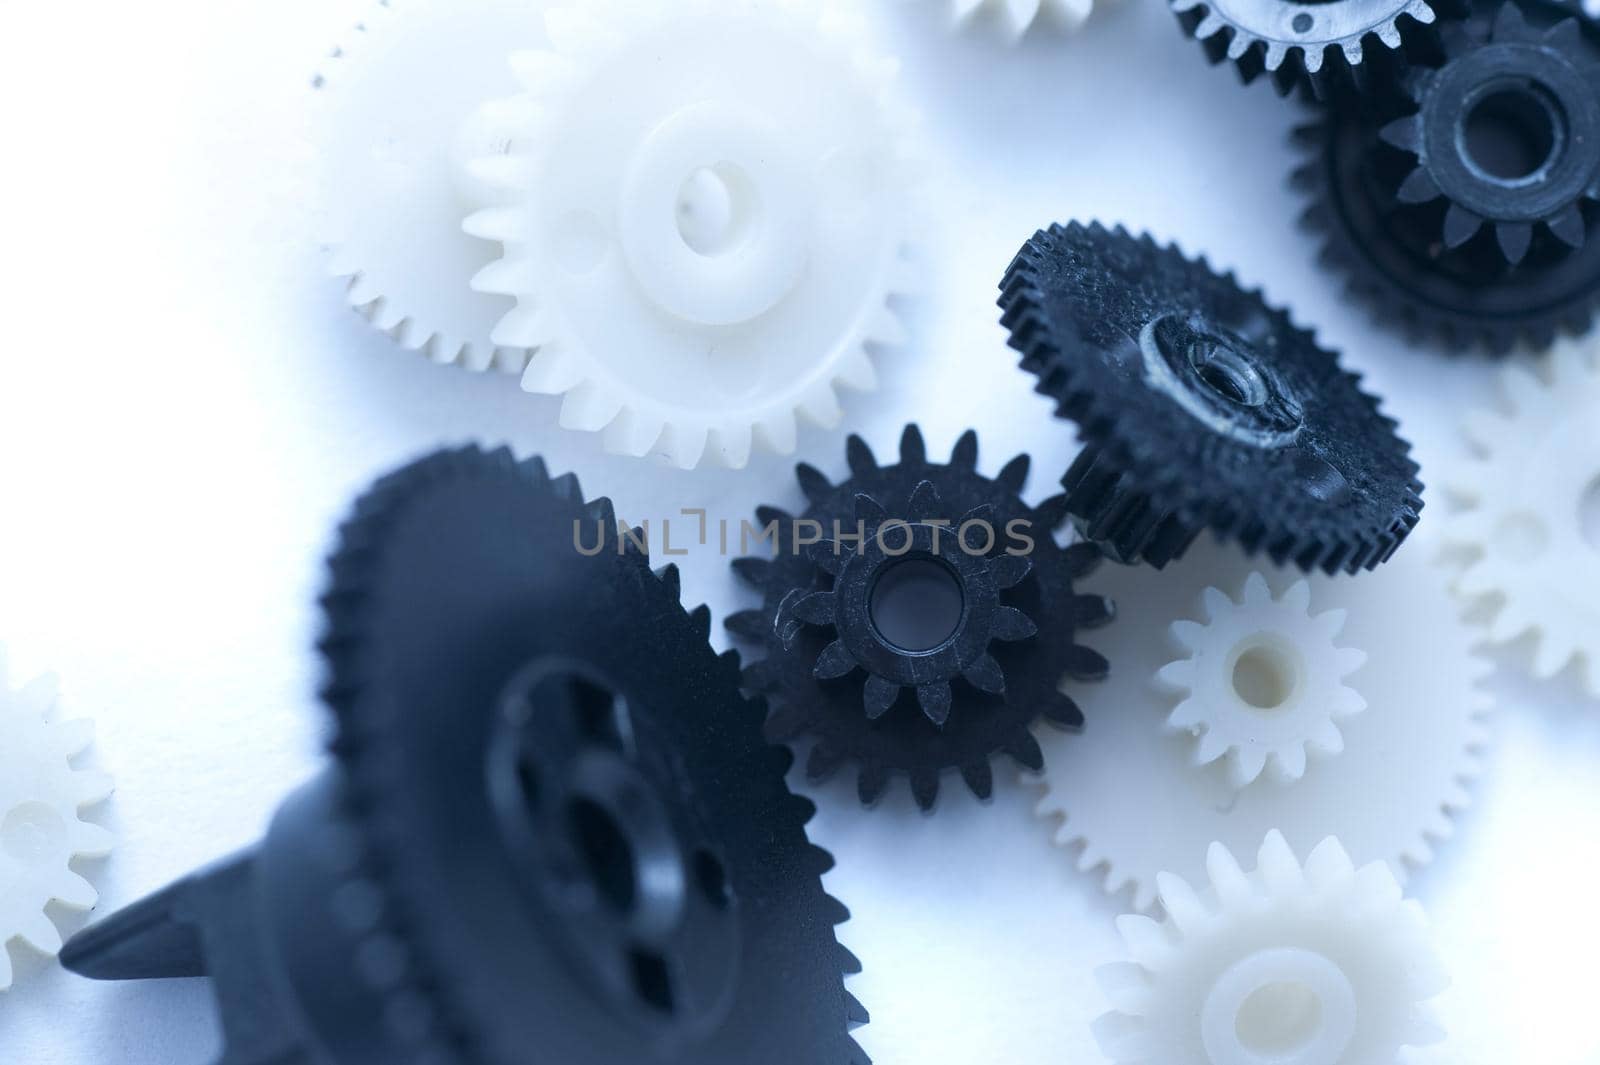 Close up Black and White Gears on White Table for an Unorganized Concept